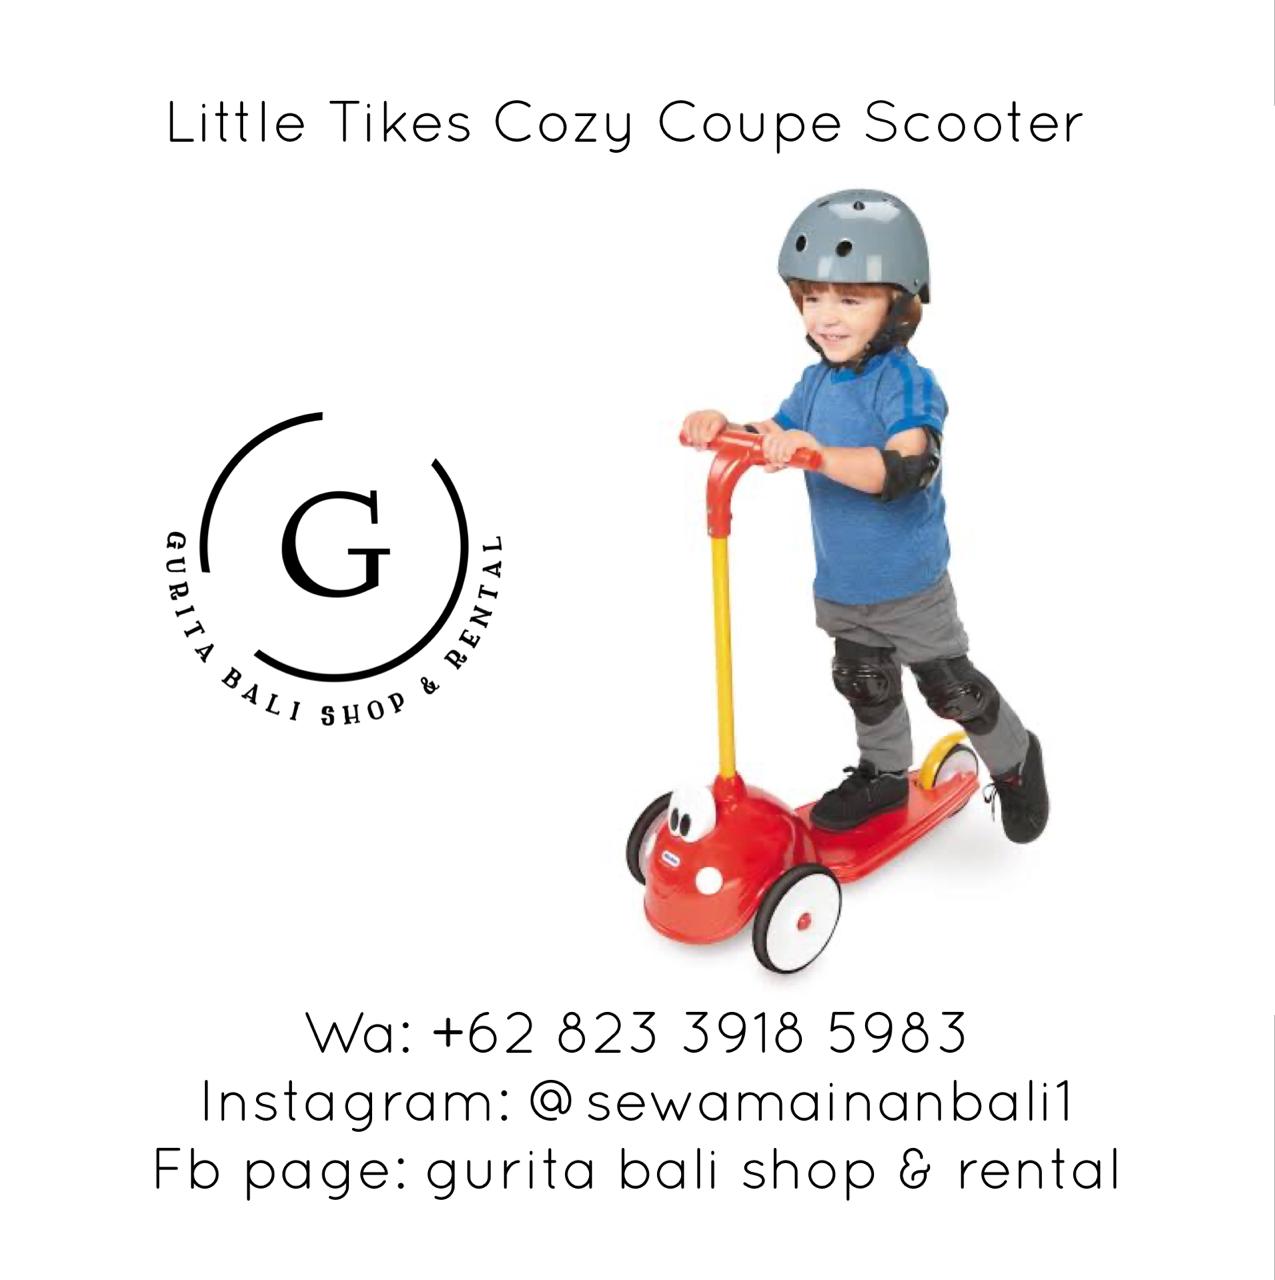 LITTLE TIKES COZY COUPE SCOOTER